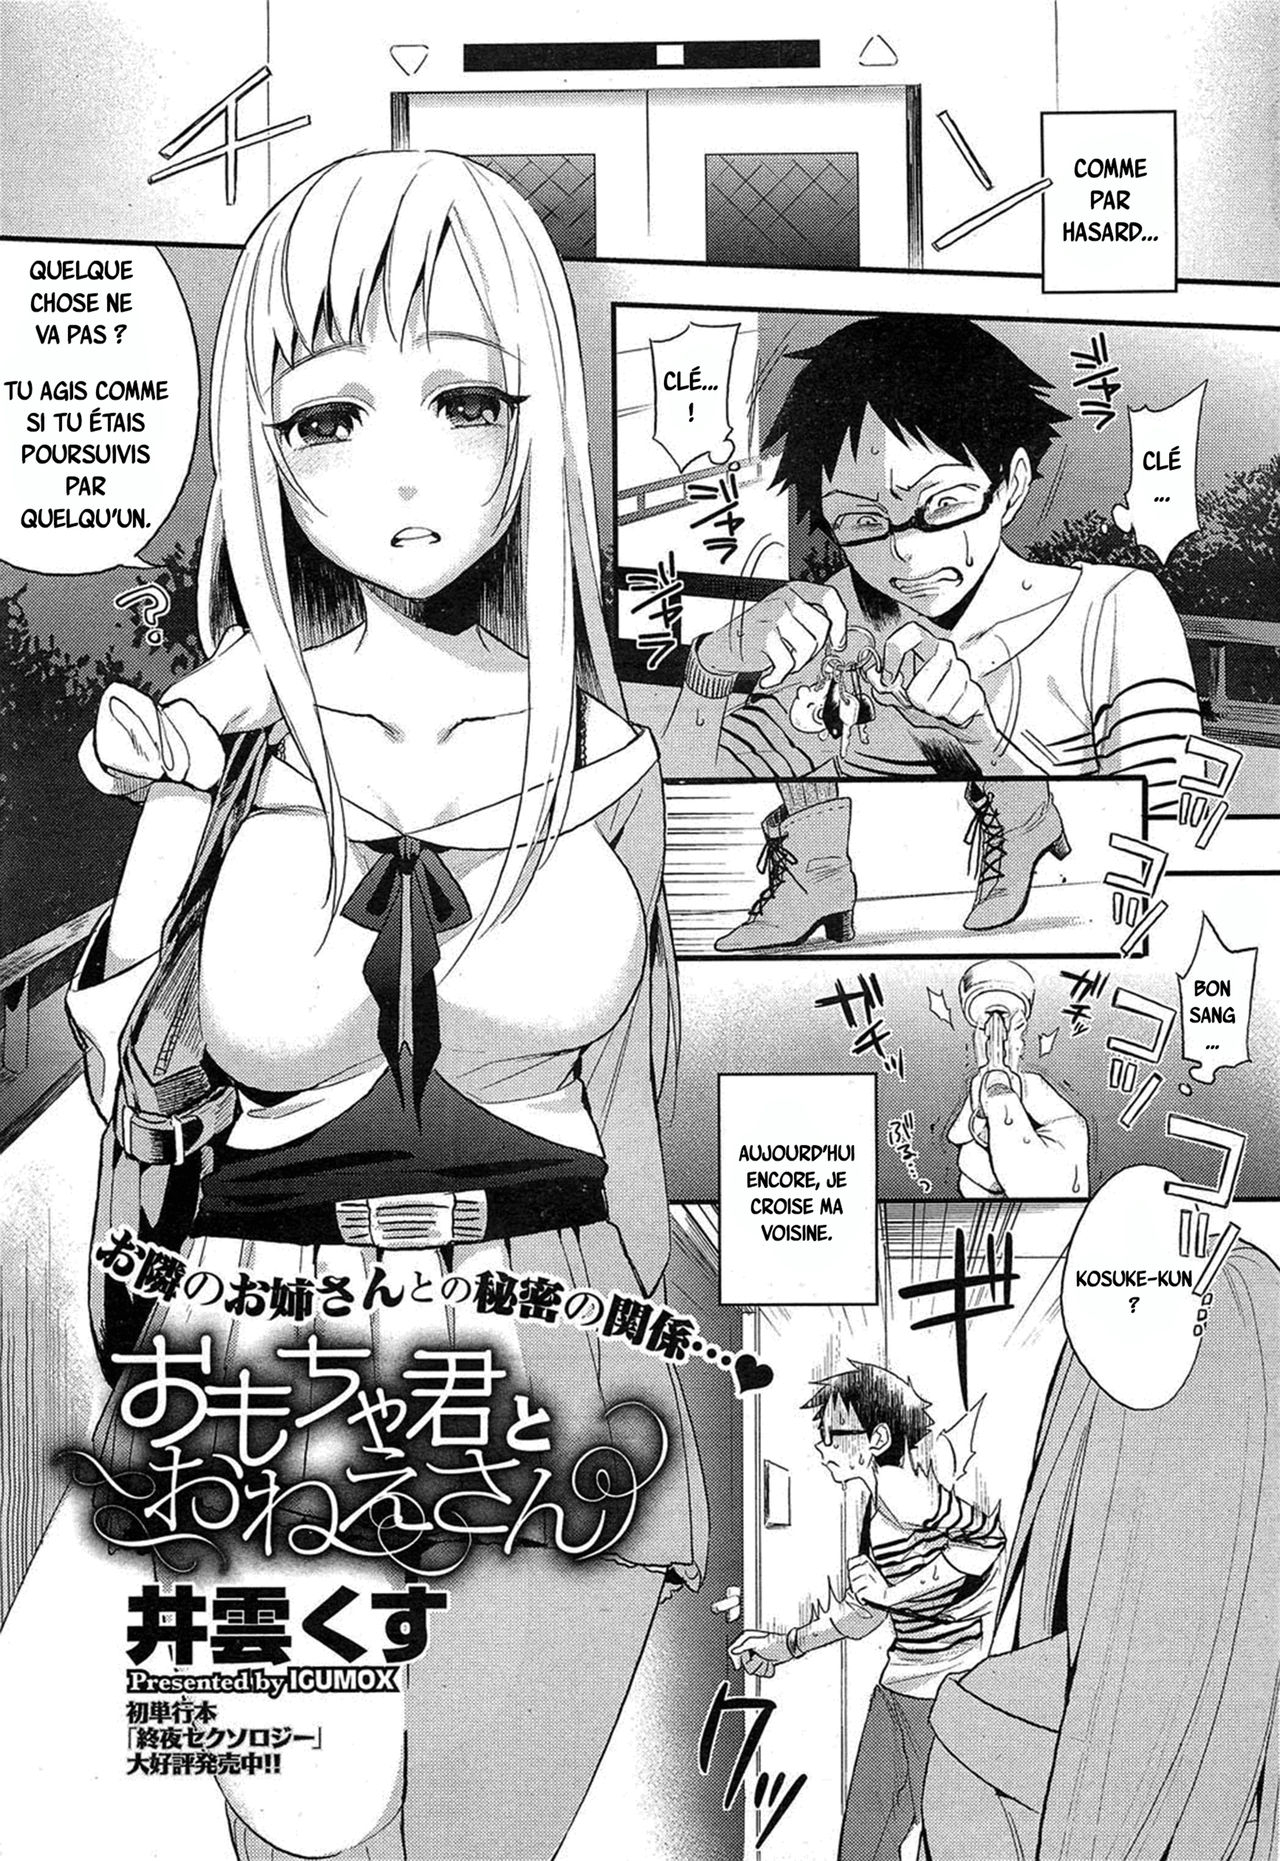 [Igumox] Omocha-kun to Onee-san | A Young Lady And Her Little Toy (COMIC HOTMiLK 2012-12) [French] 0